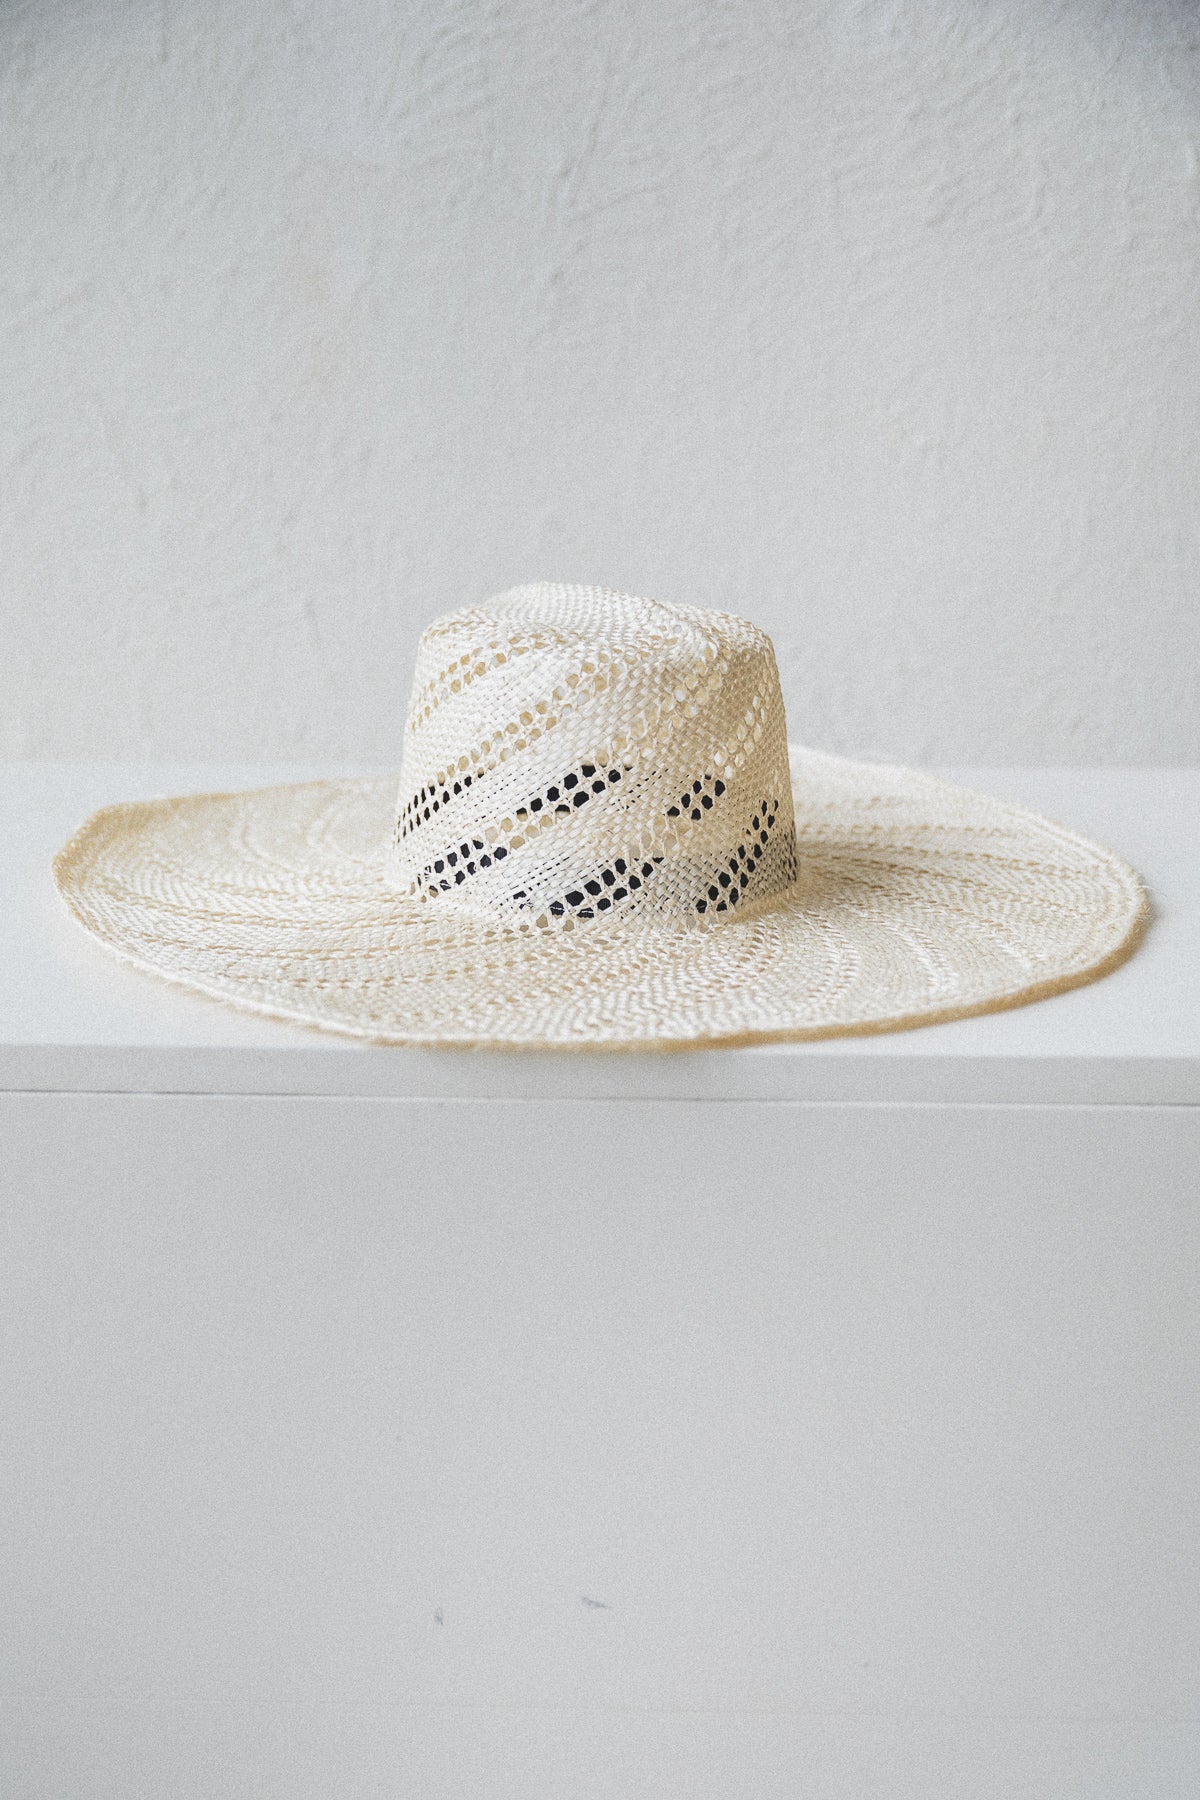 OPTIMO PACKABLE HAT IN SPIRAL WEAVE